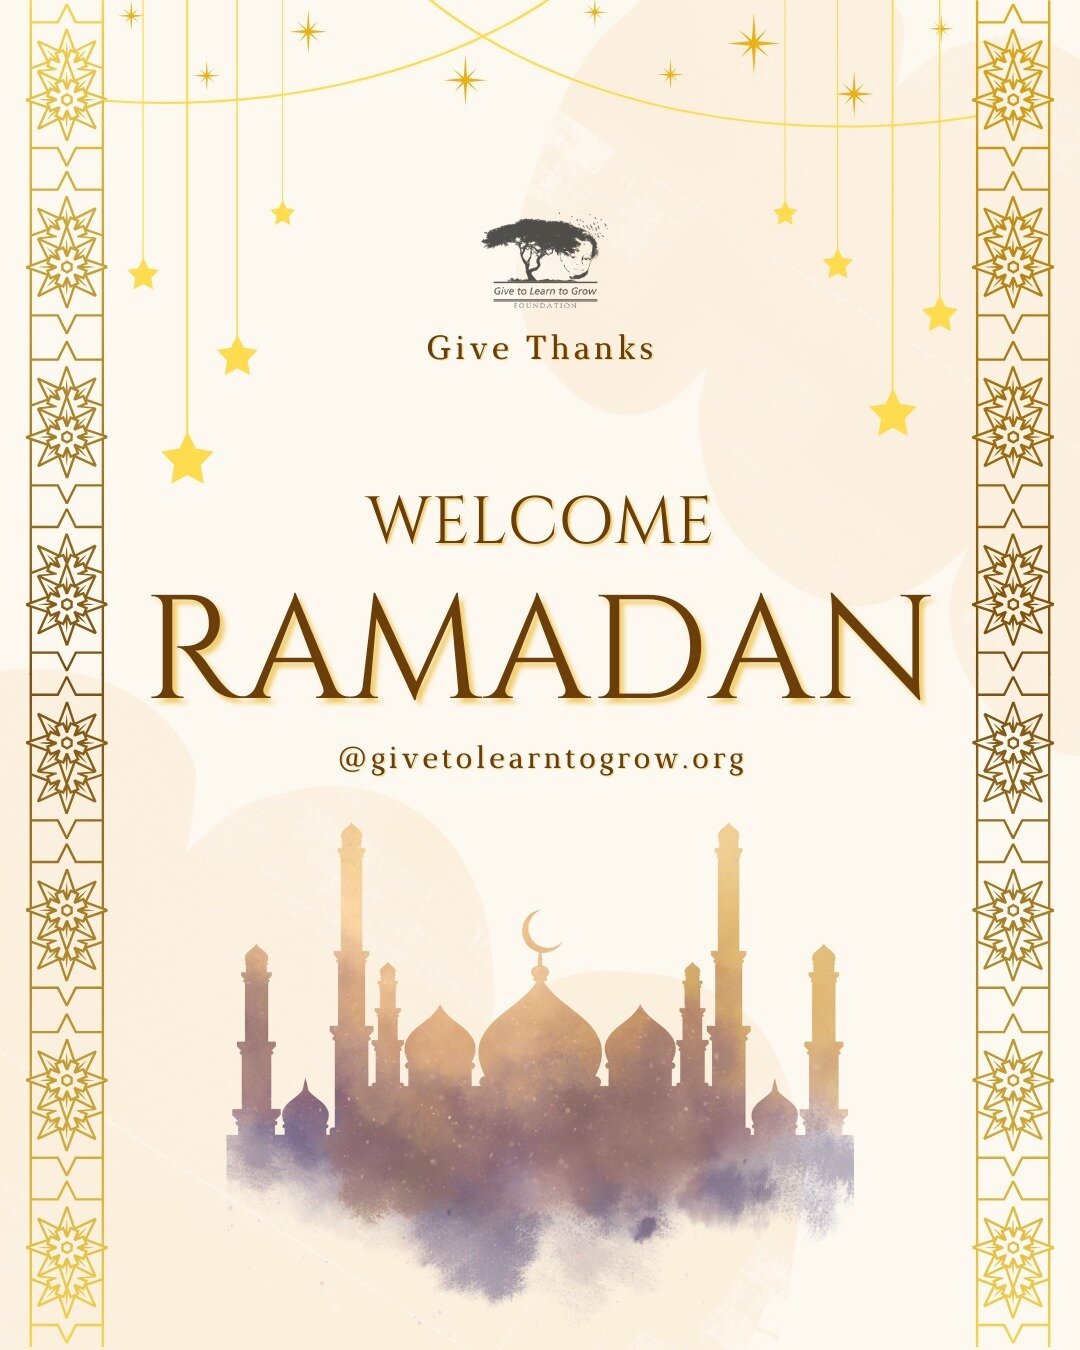 🌙 Ramadan Mubarak to our cherished community! 🌟

As we welcome the blessed month of Ramadan, let's embrace its compassion, generosity, and solidarity spirit. This month is a time for reflection, gratitude, and giving back to those in need.

With ju